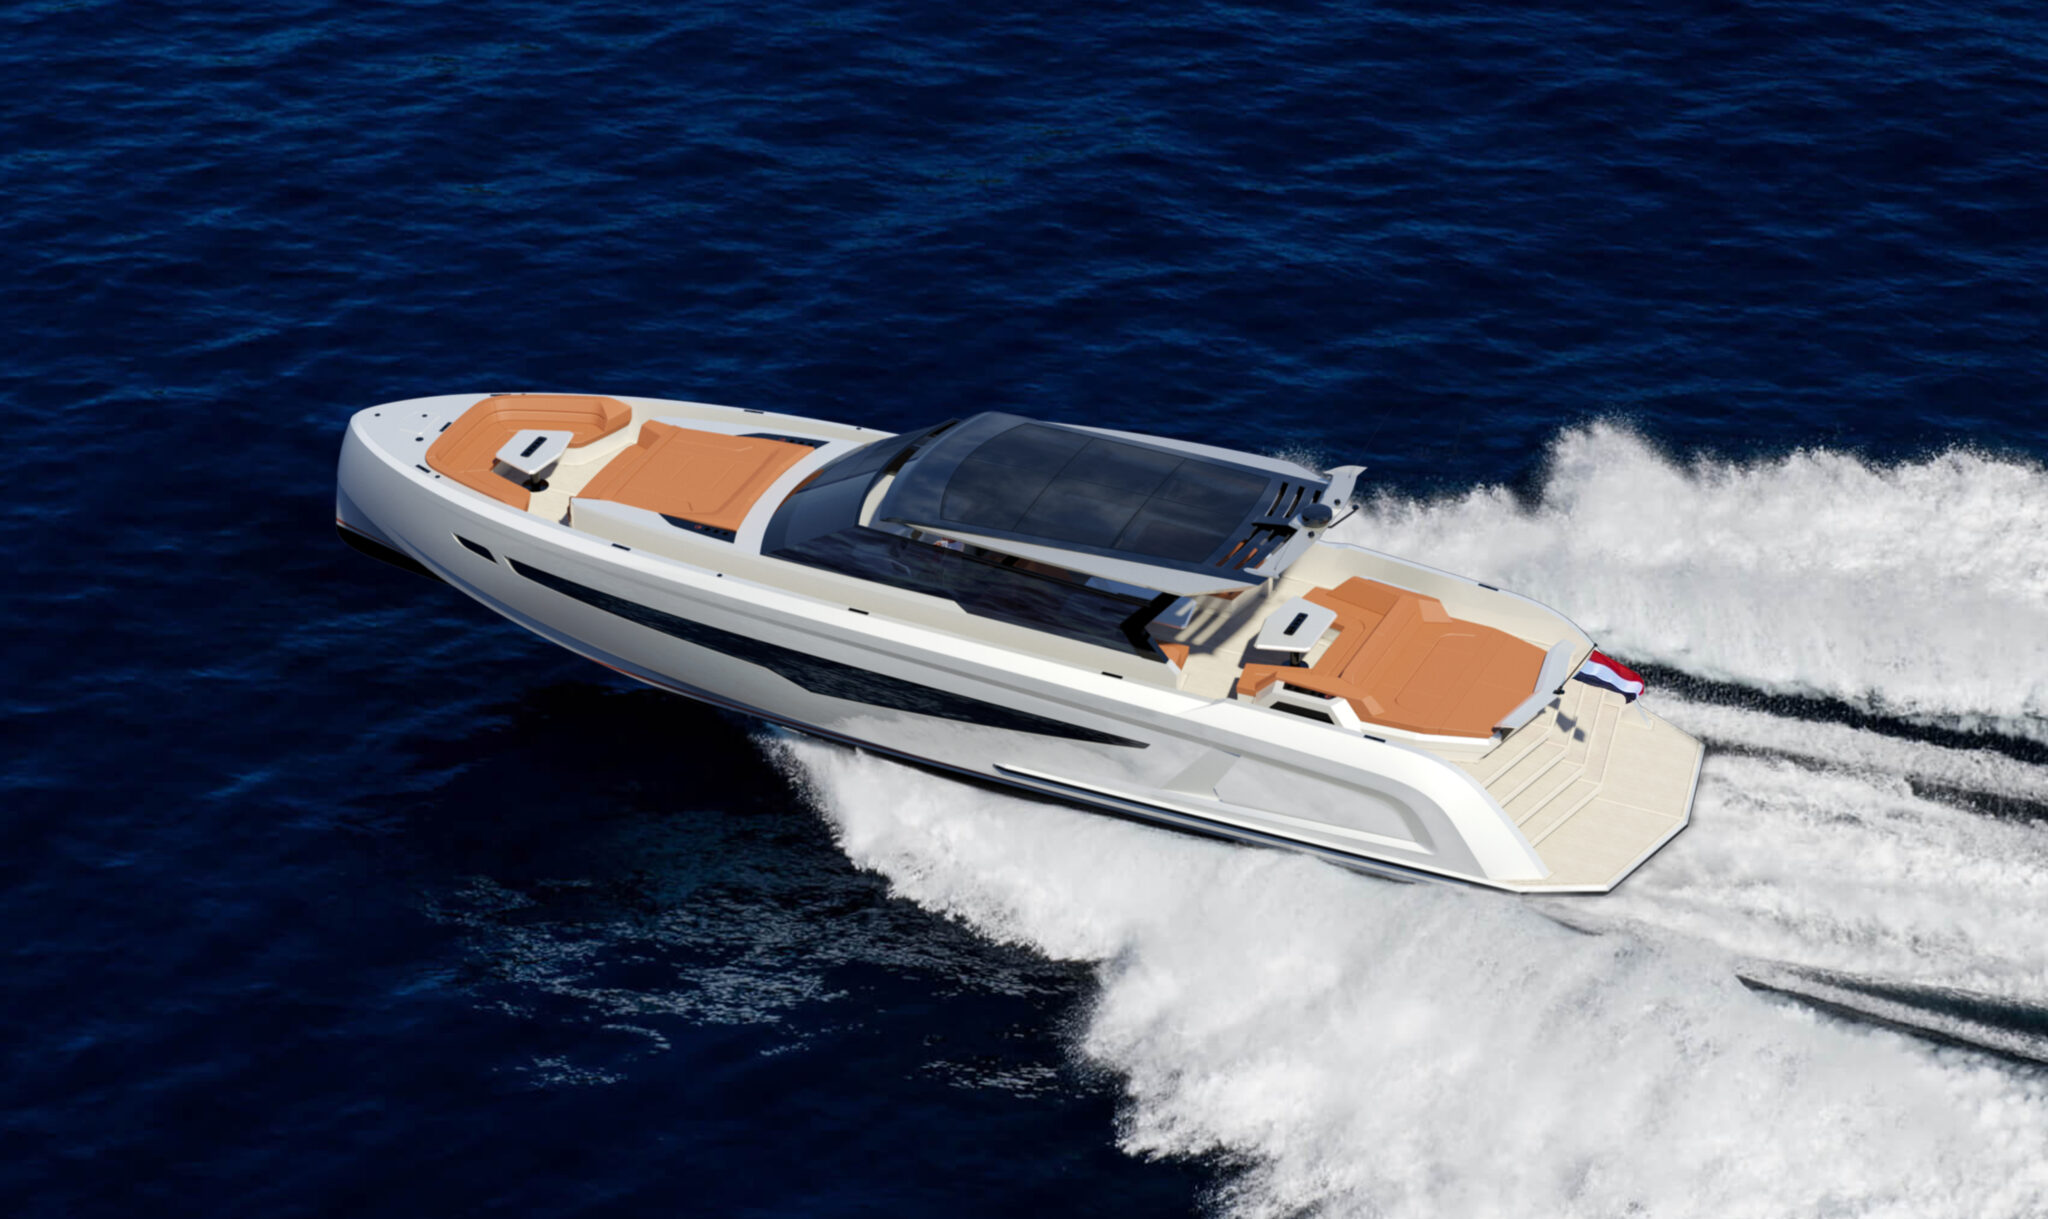 Order for all-new VQ70 - Vanquish Yachts